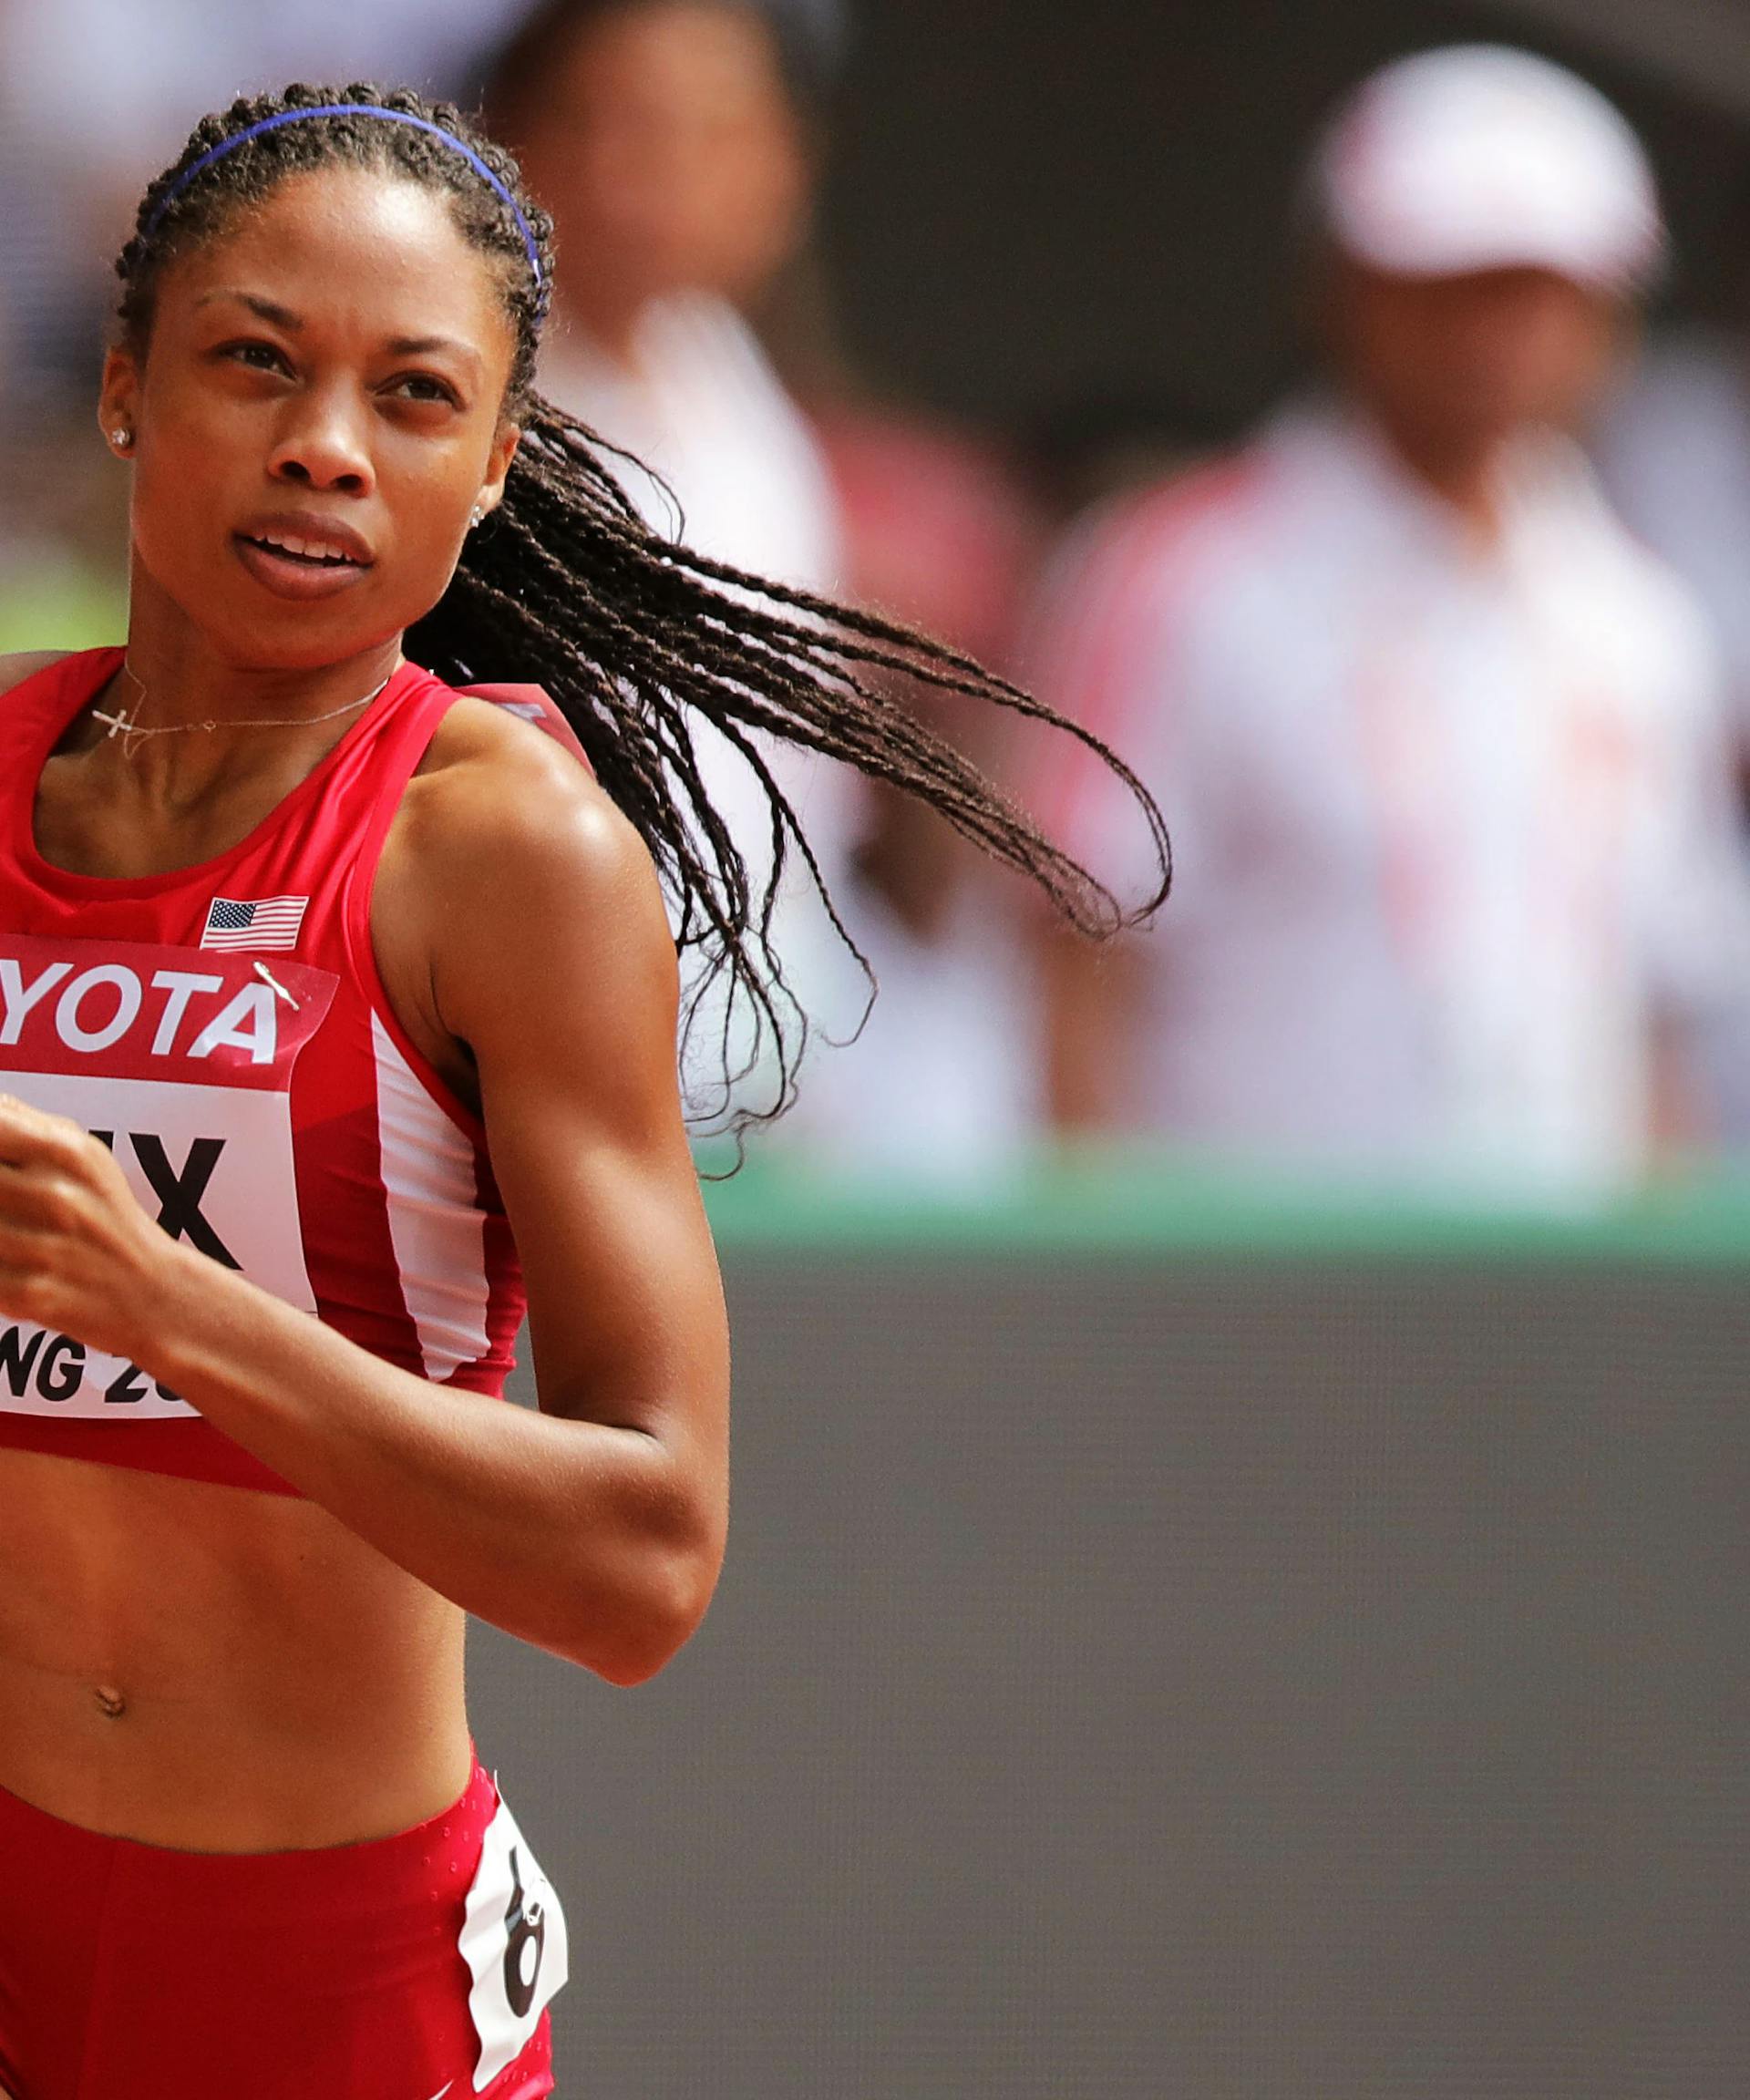 Nike Asked Olympian Allyson Felix To Star In Female-Empowerment Ads While Quietly Fighting Her Maternity Protections